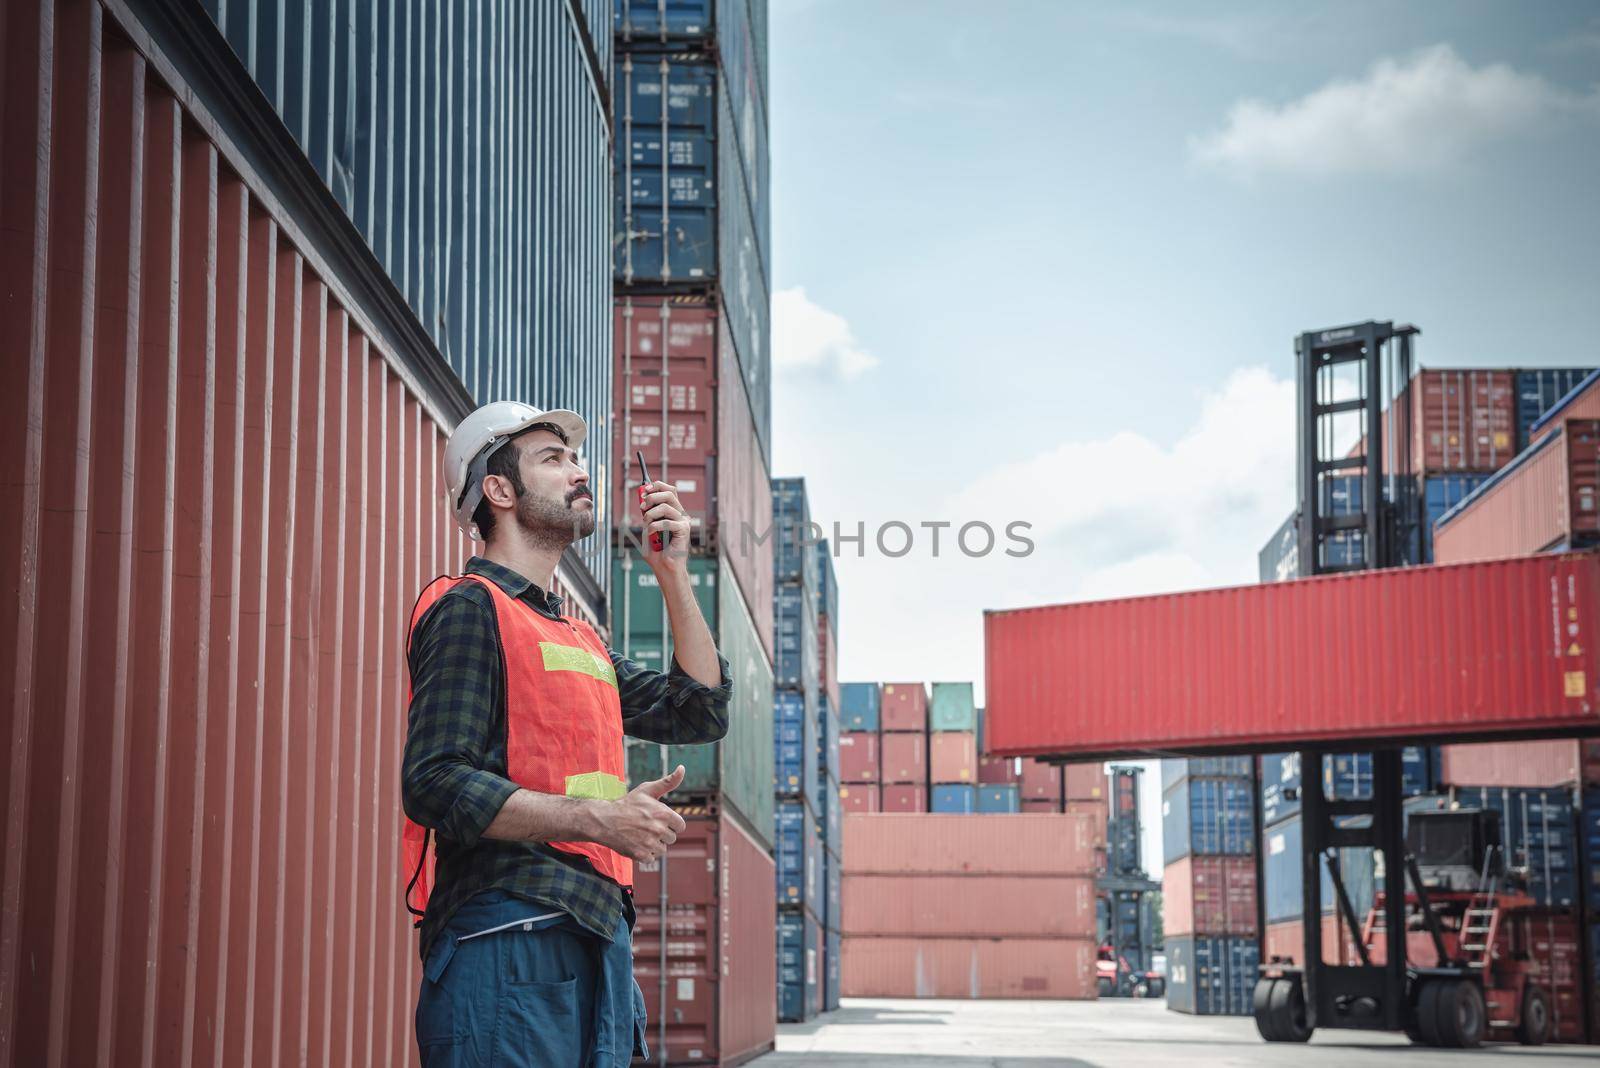 Container Logistics Shipping Management of Transportation Industry, Transport Engineer Managing Control Via Walkie Talkie in Containers Shipyard. Business Cargo Ship Import/Export Factory Logistic.